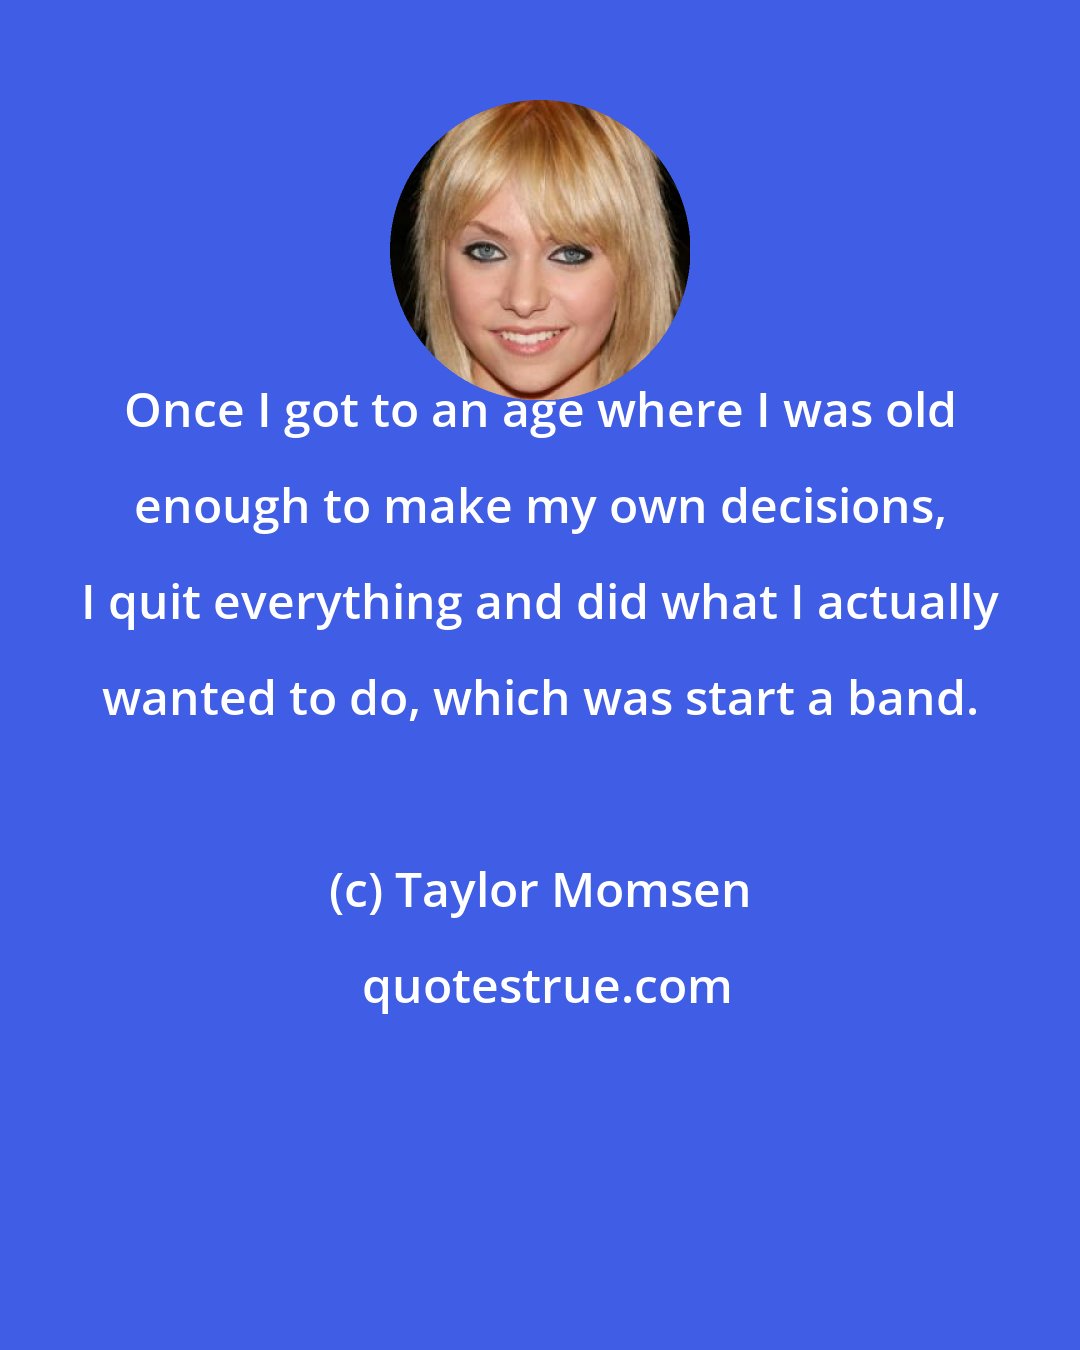 Taylor Momsen: Once I got to an age where I was old enough to make my own decisions, I quit everything and did what I actually wanted to do, which was start a band.